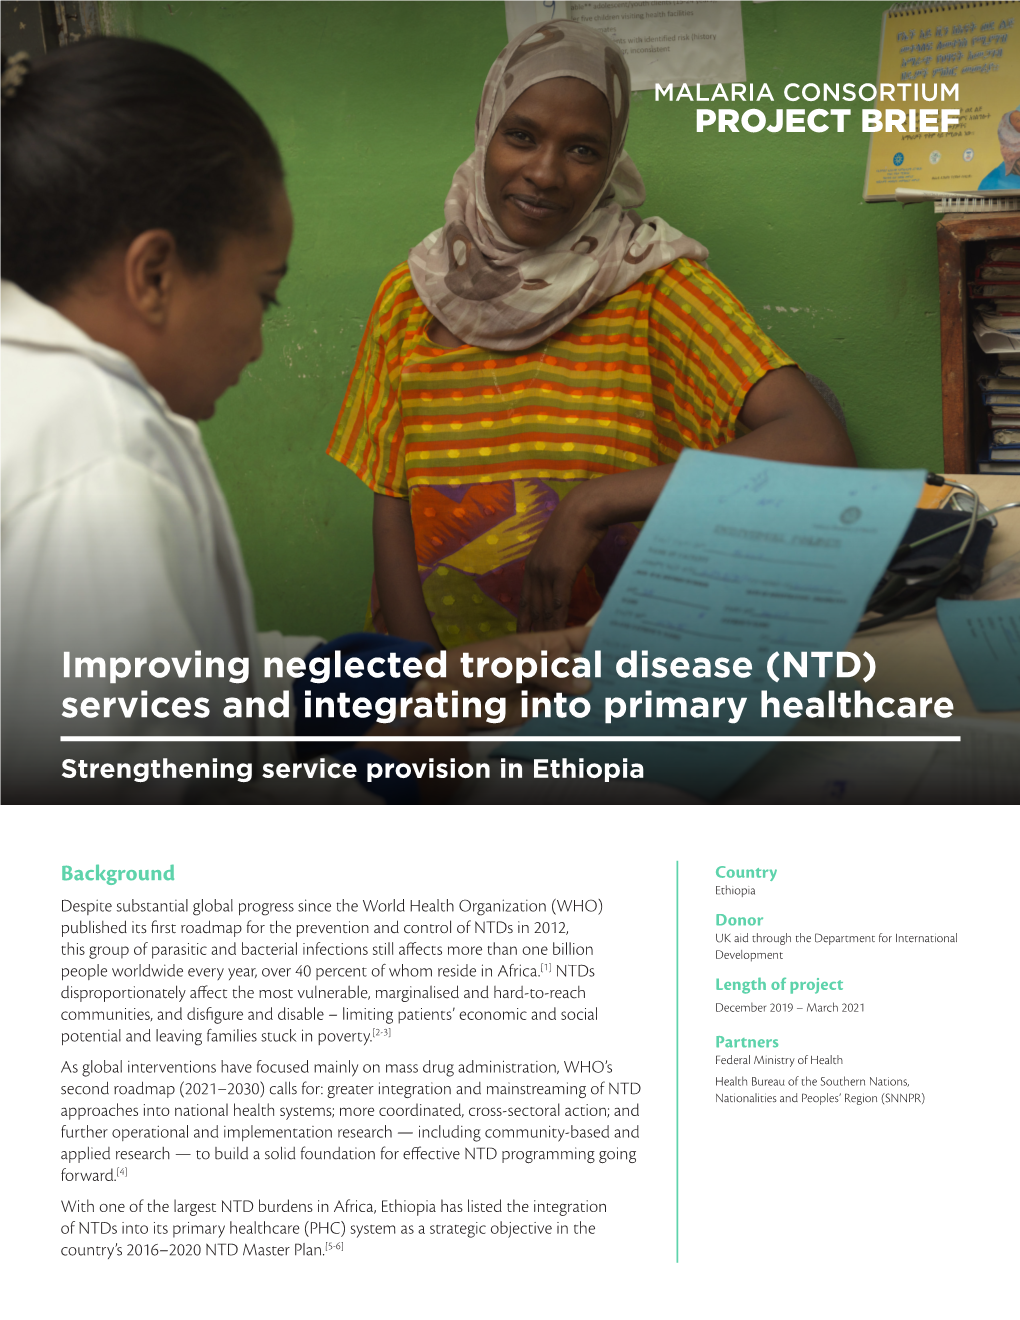 Improving Neglected Tropical Disease (NTD) Services and Integrating Into Primary Healthcare